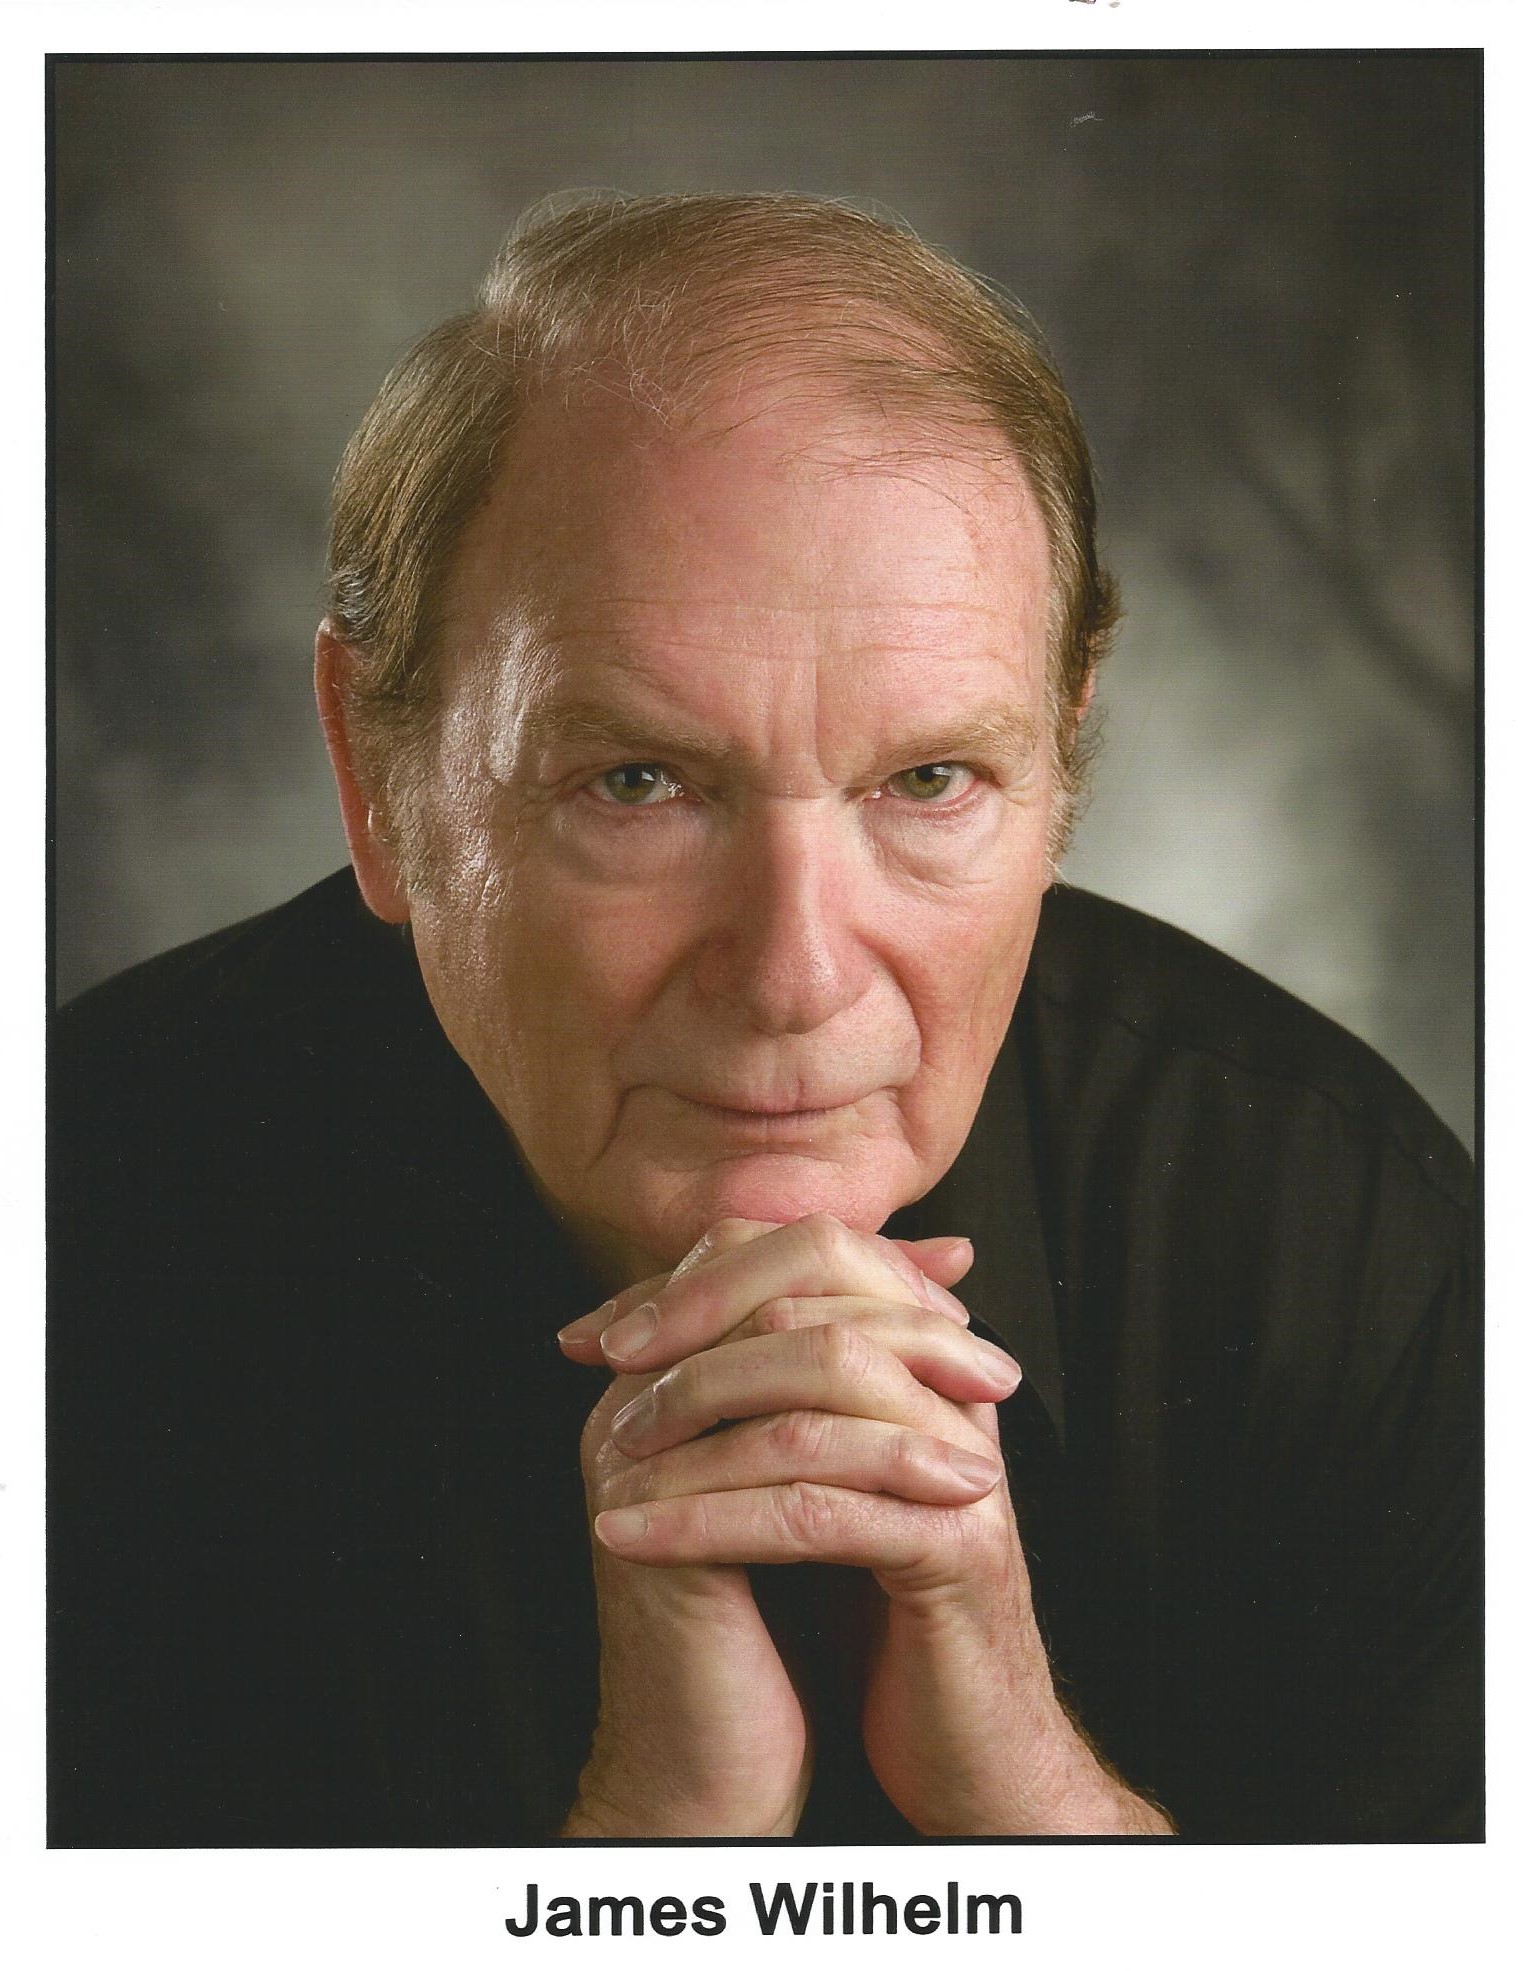 A man in a dark turtleneck shirt.  He is leaning forward with his chin resting on his folded hands.